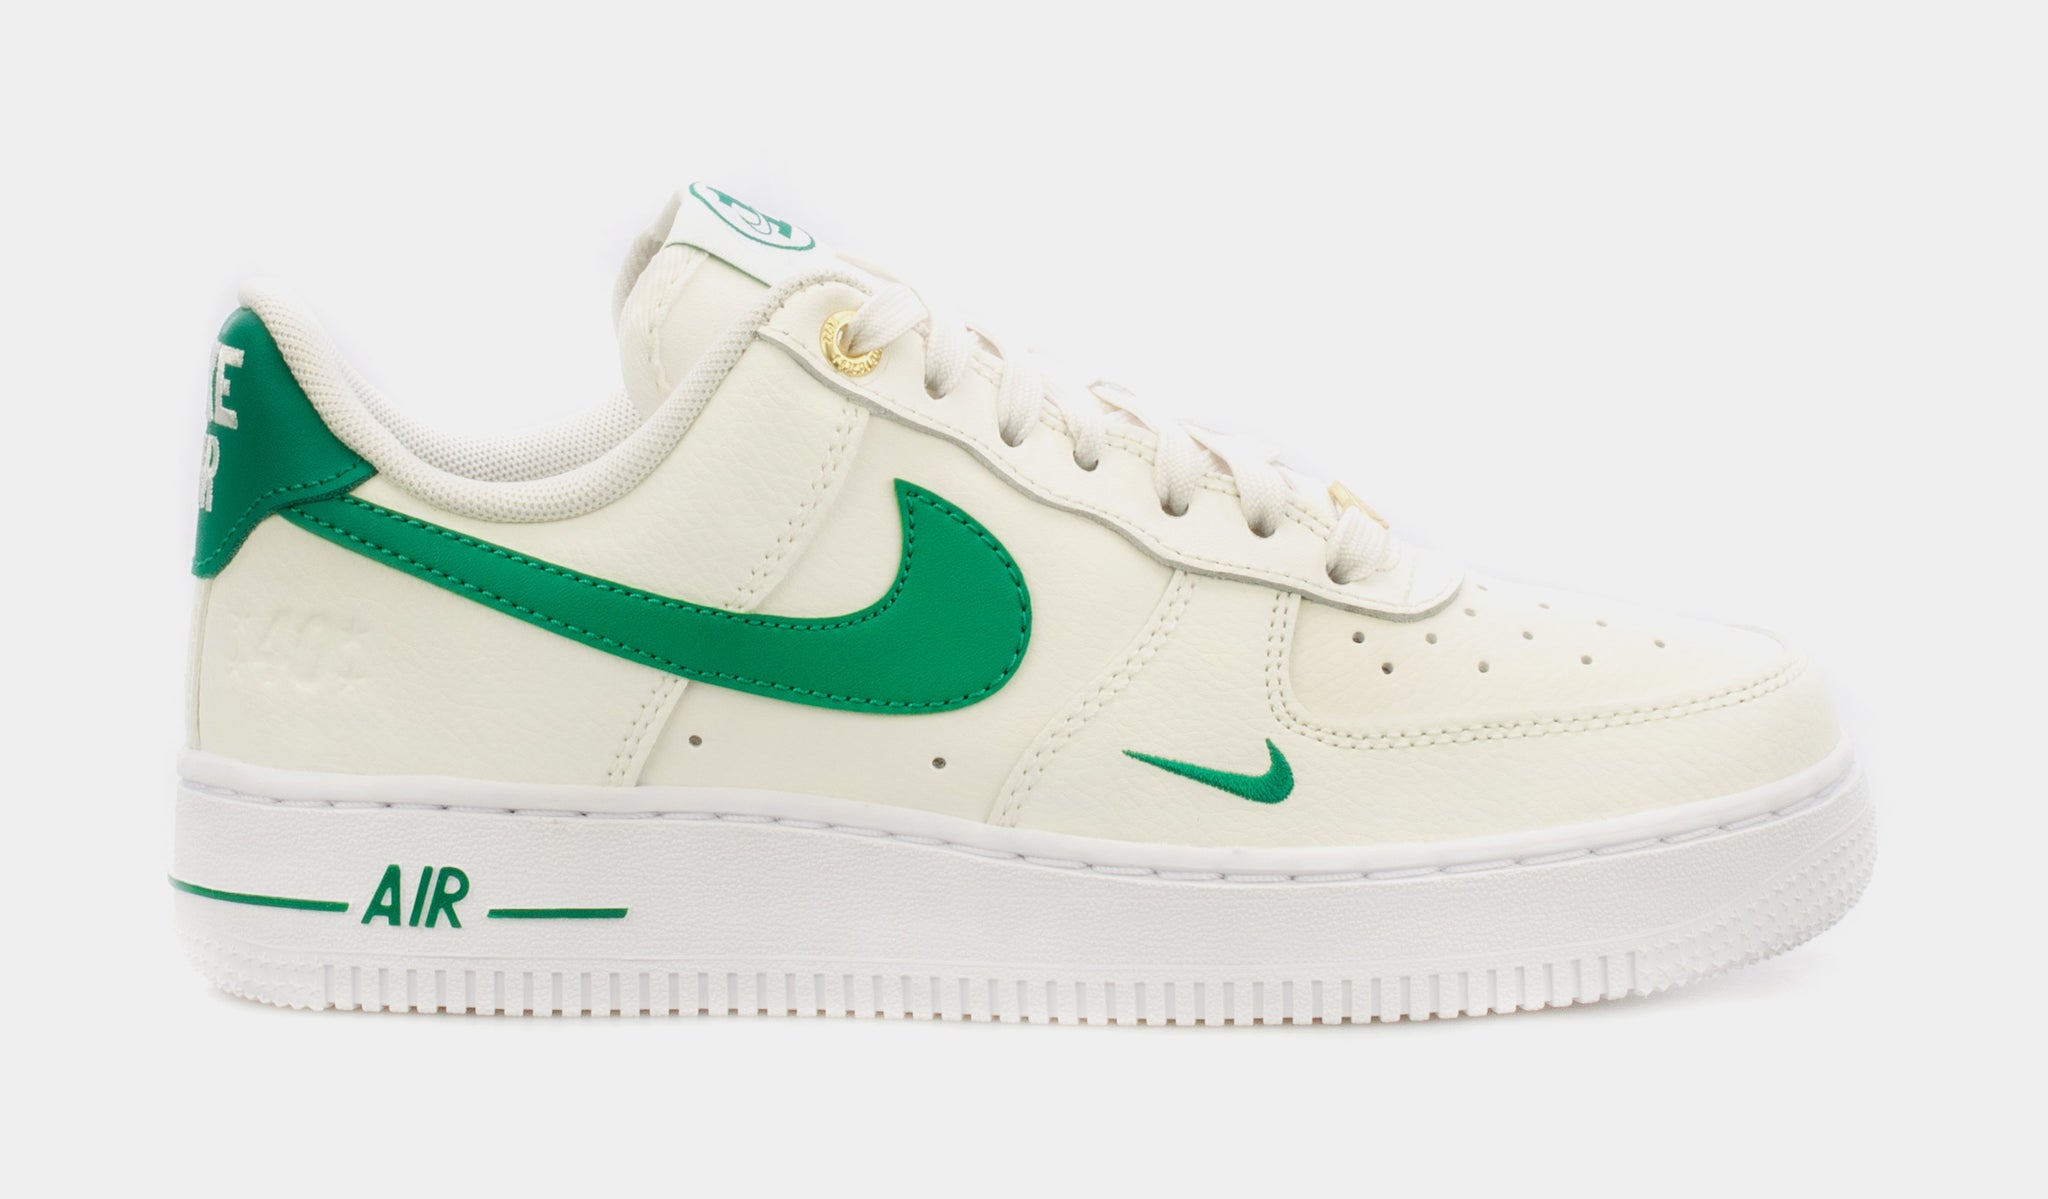 Nike Air Force 1 '07 sneakers in white and green